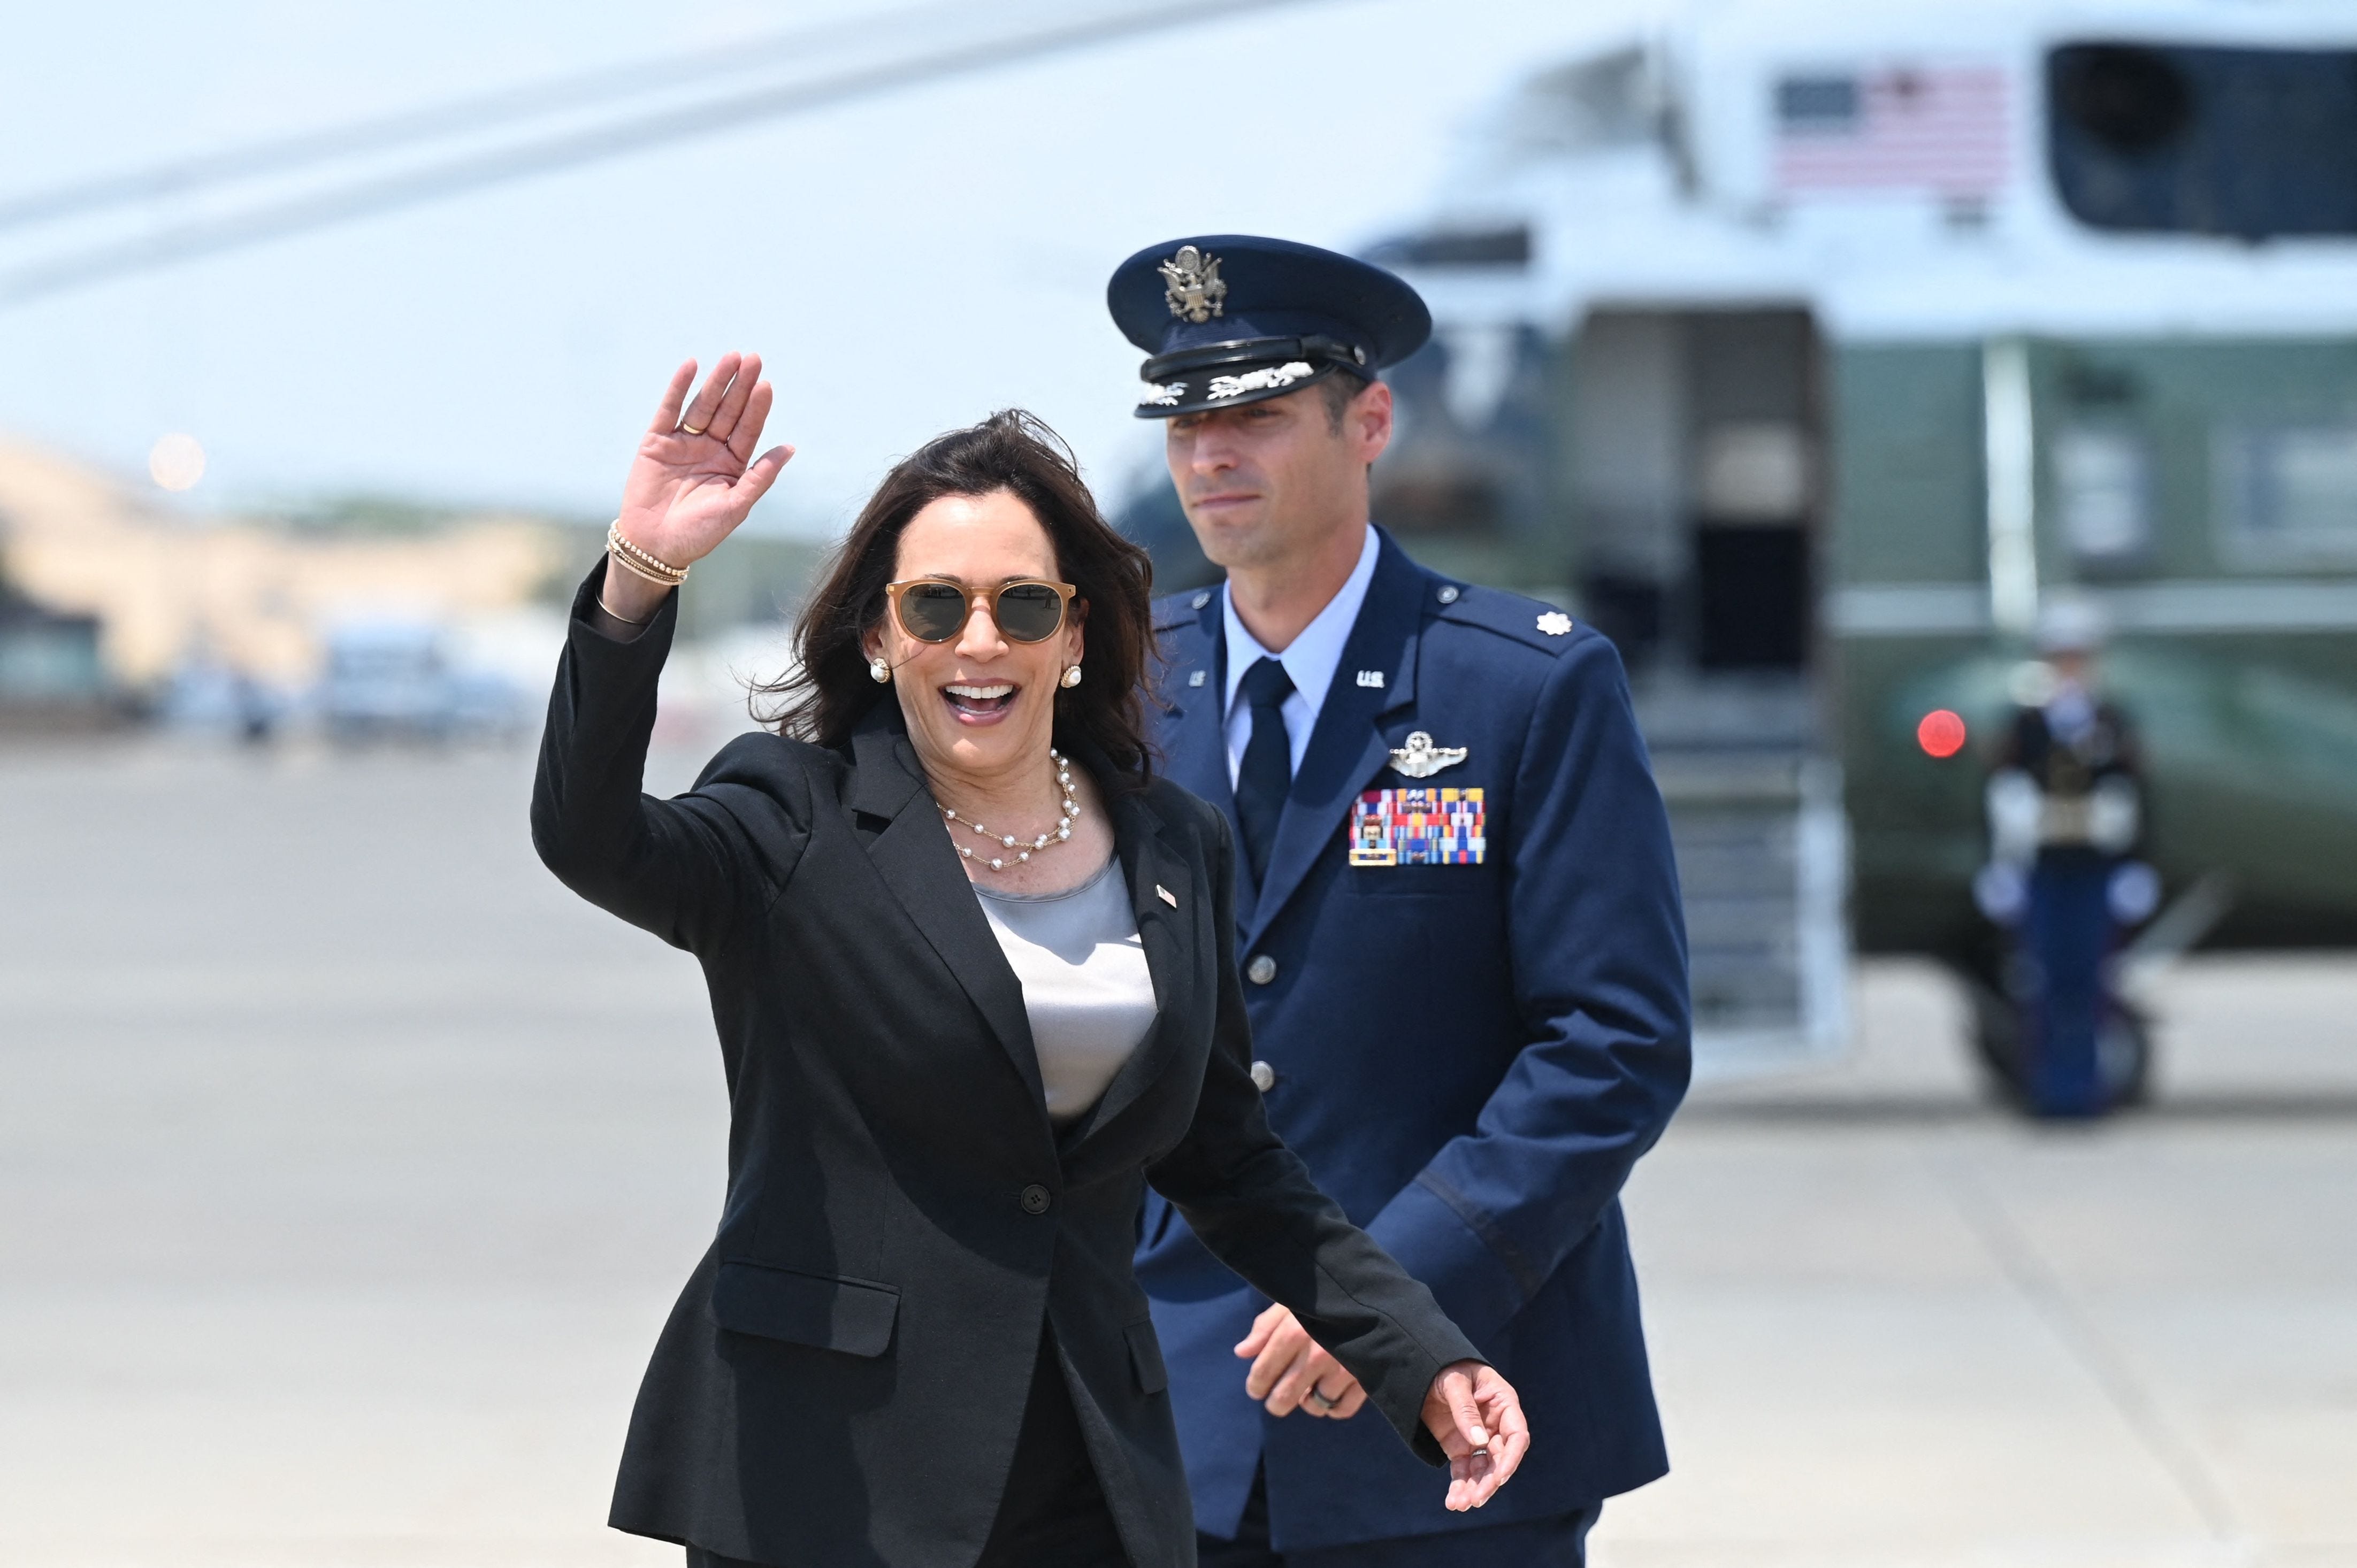 Vice President Kamala Harris boards Air Force Two to fly to Guatemala and Mexico on June 6, 2021, at Andrews Air Force Base in Maryland.